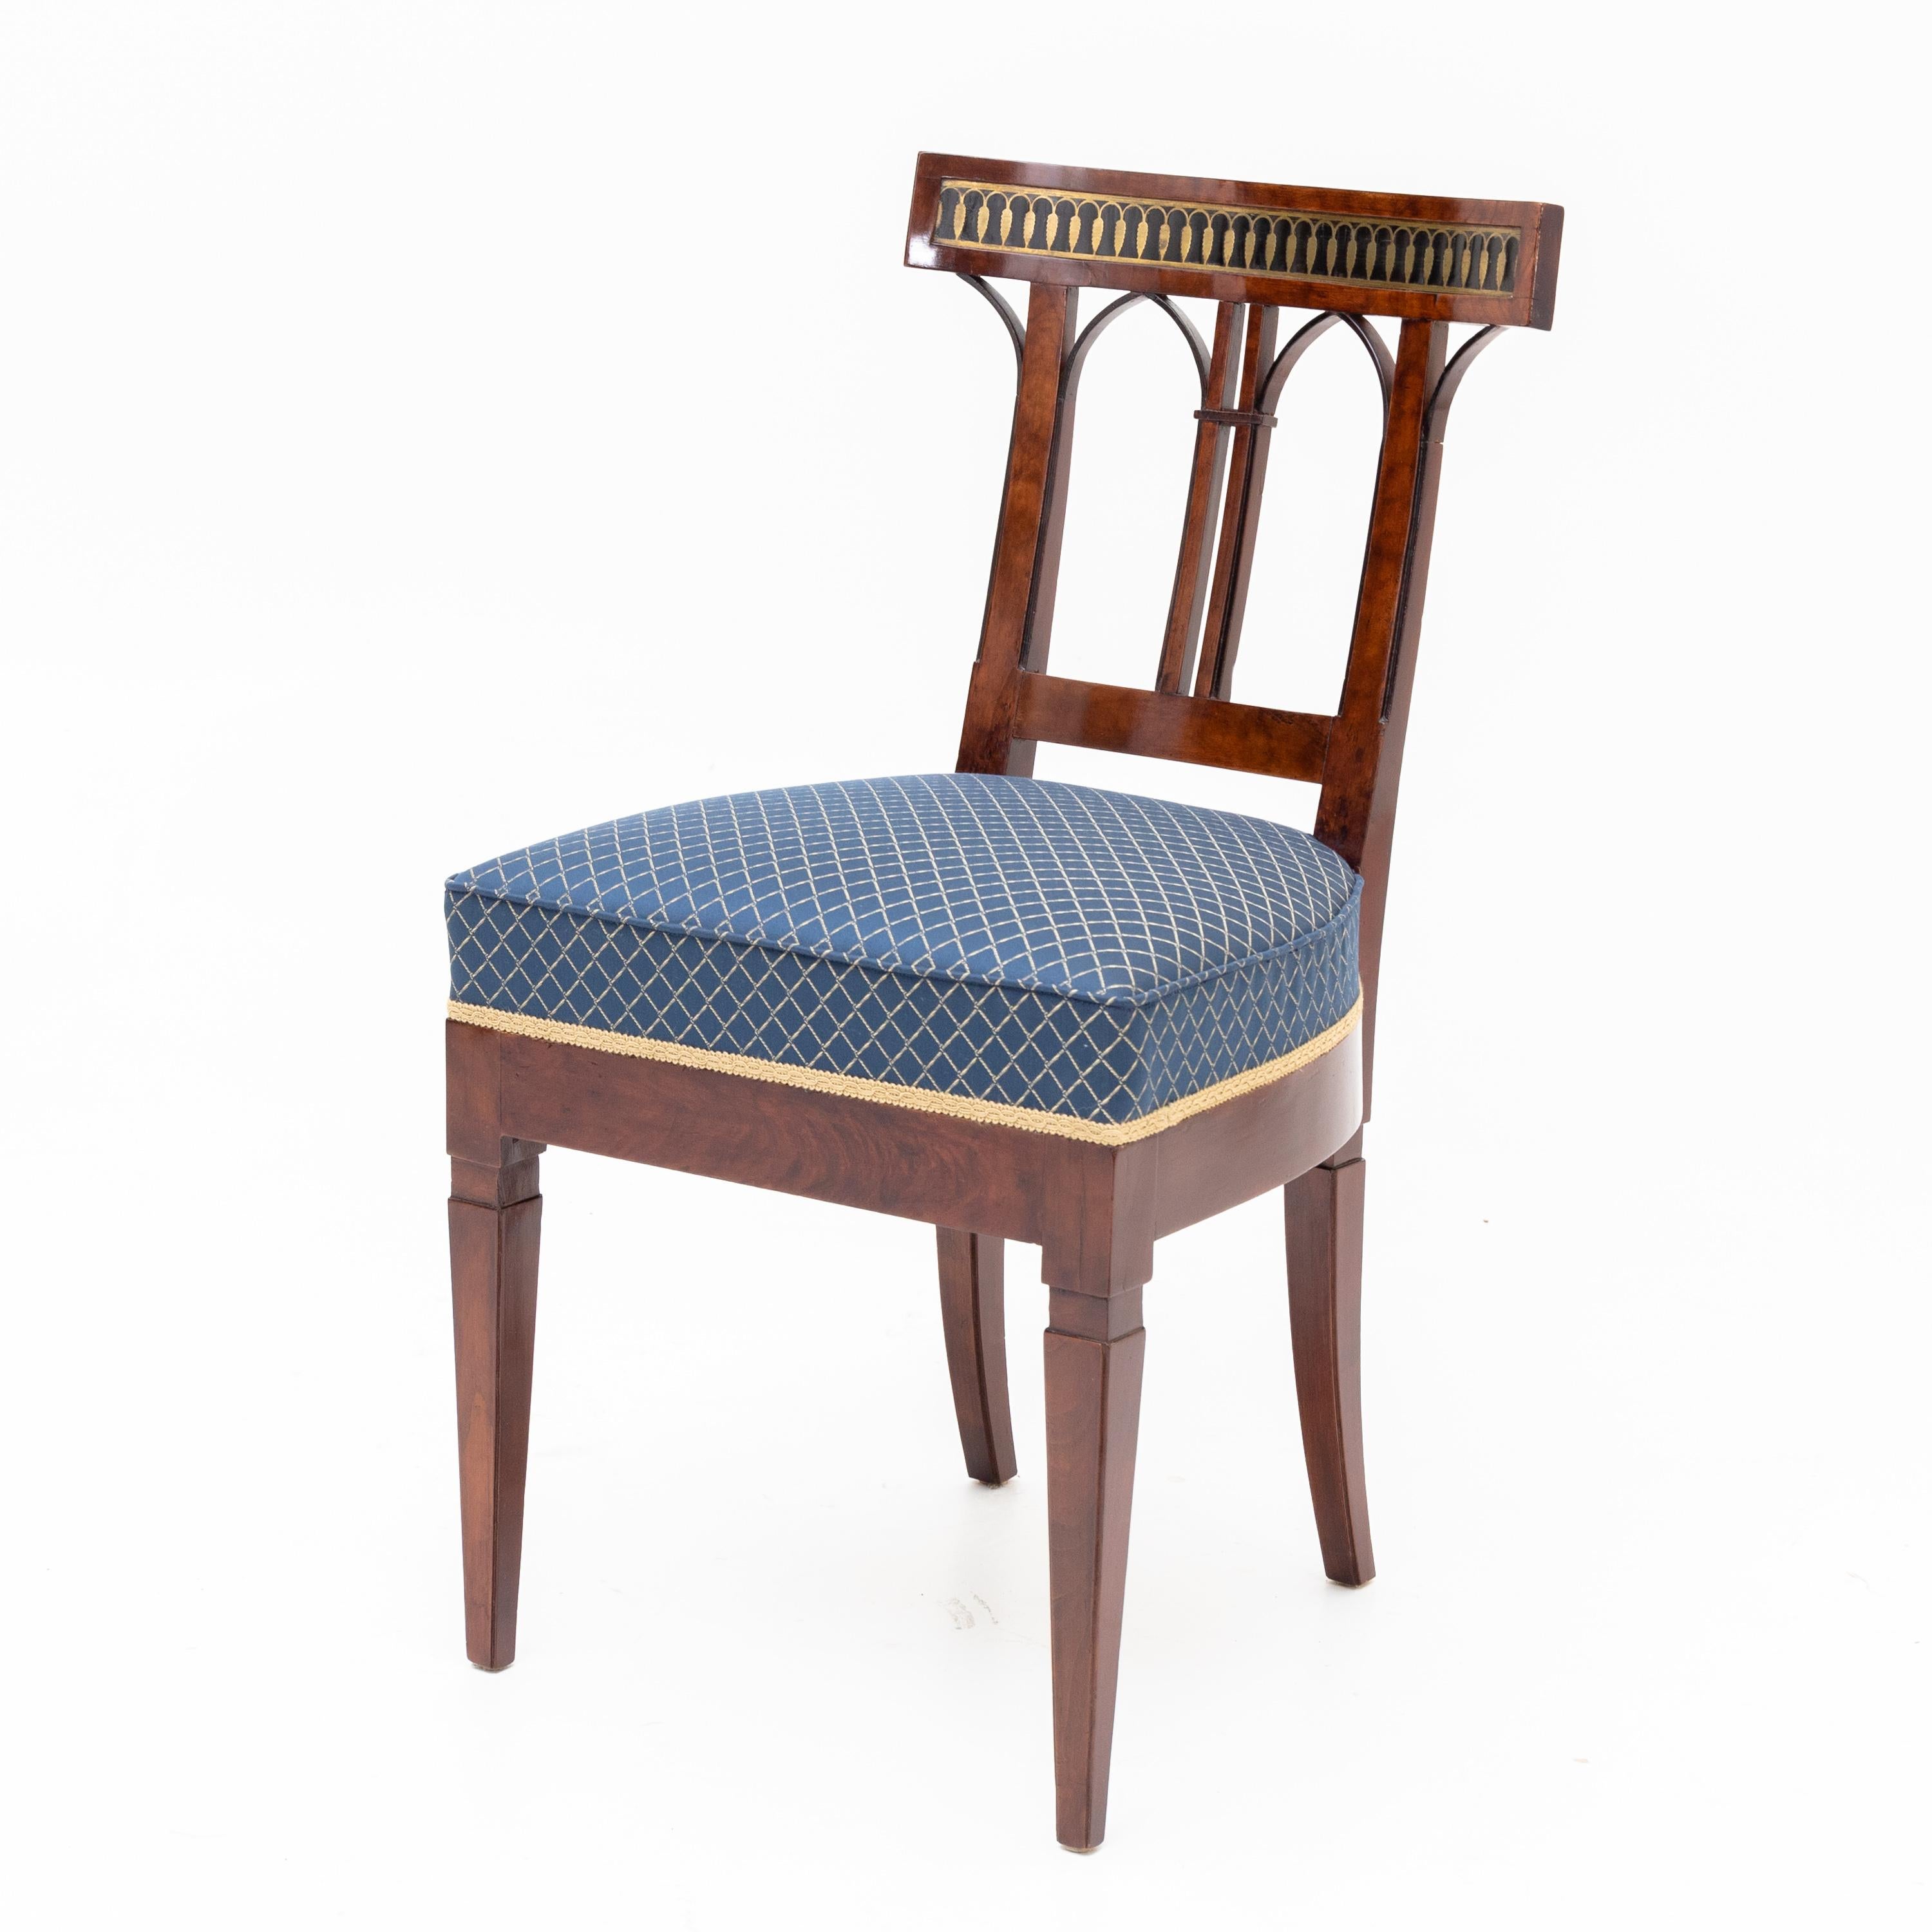 Neoclassical chair on square pointed legs with straight frame and trapezoidal upholstered seat and openwork backrest with stylised pointed arches and brass inlays in the form of arcades and ears of corn. The chair has been newly upholstered in a